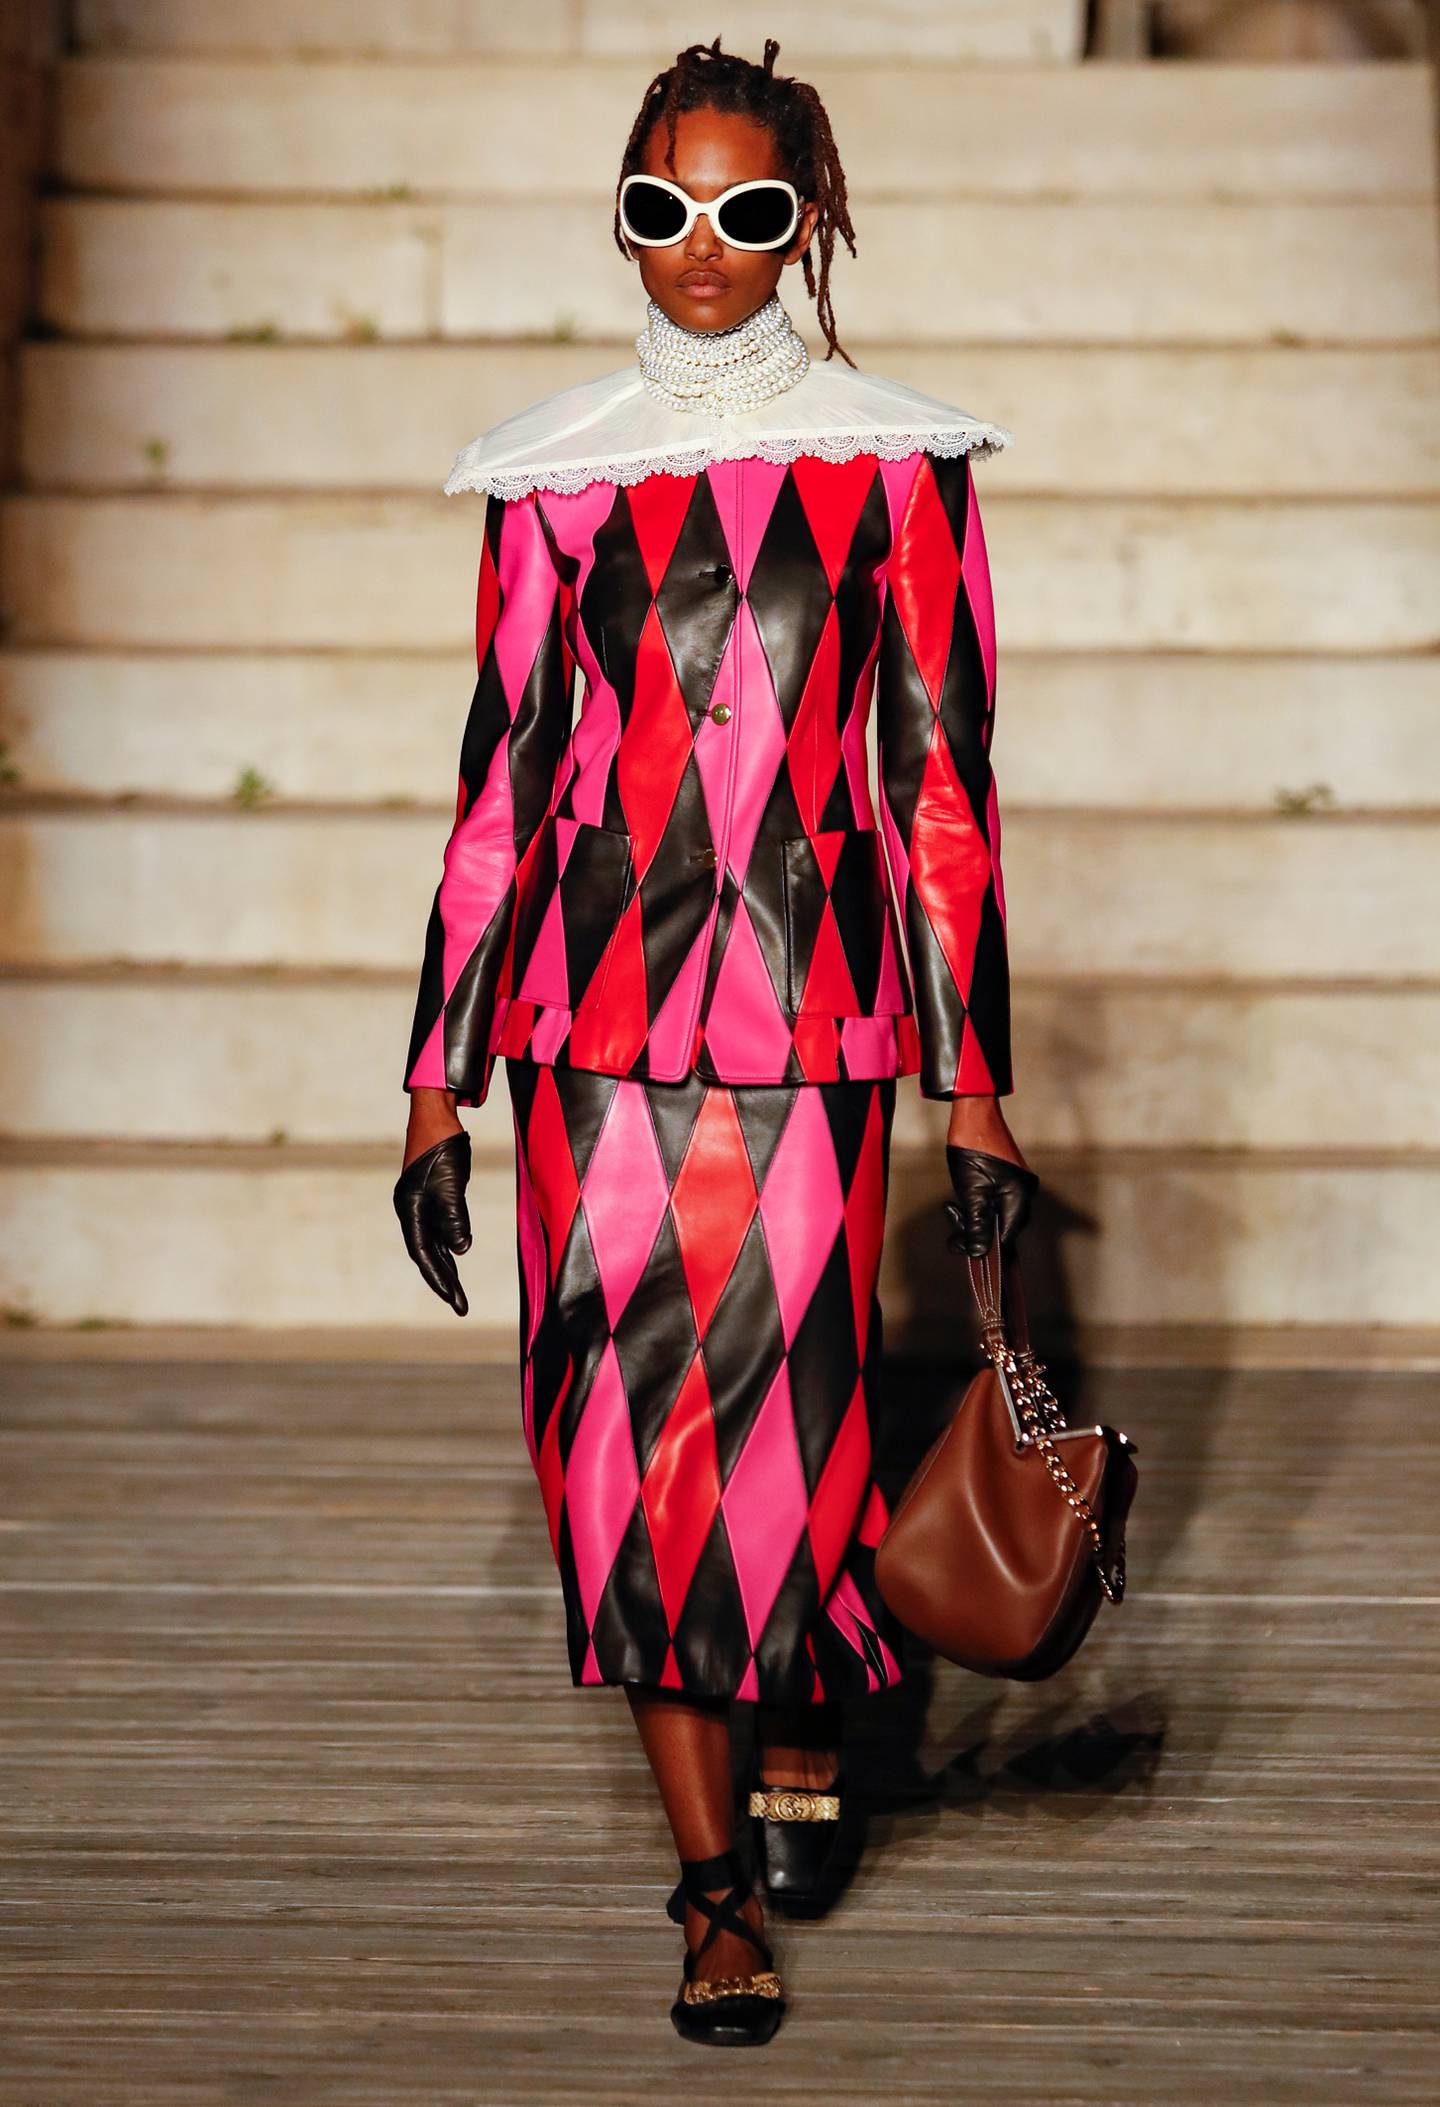 Gucci resort 2023 featured holographic, chevroned looks. Photo: Gucci